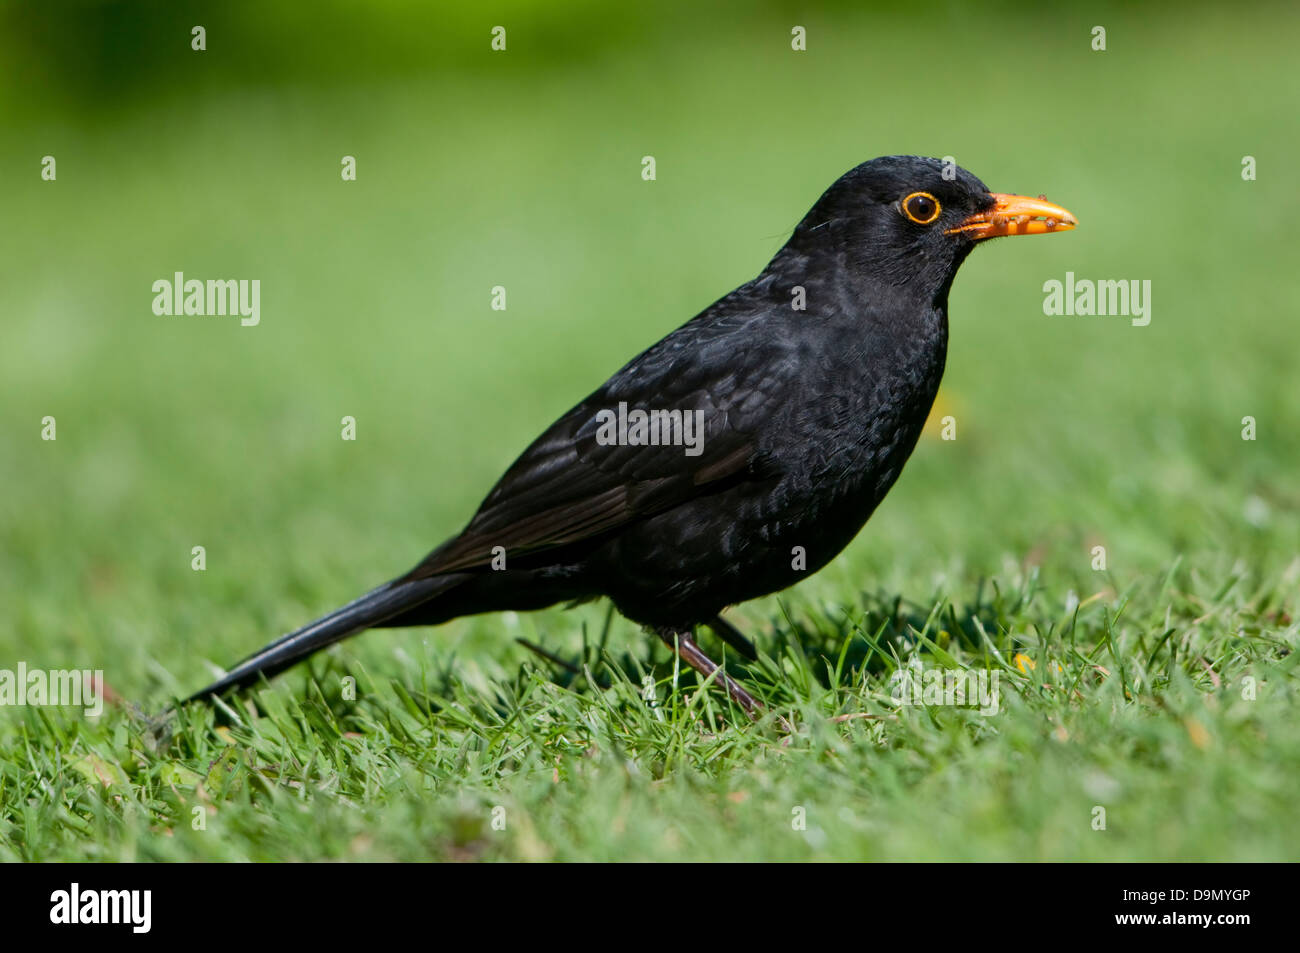 A Male Blackbird with a beak full of mealworms on garden lawn Stock Photo